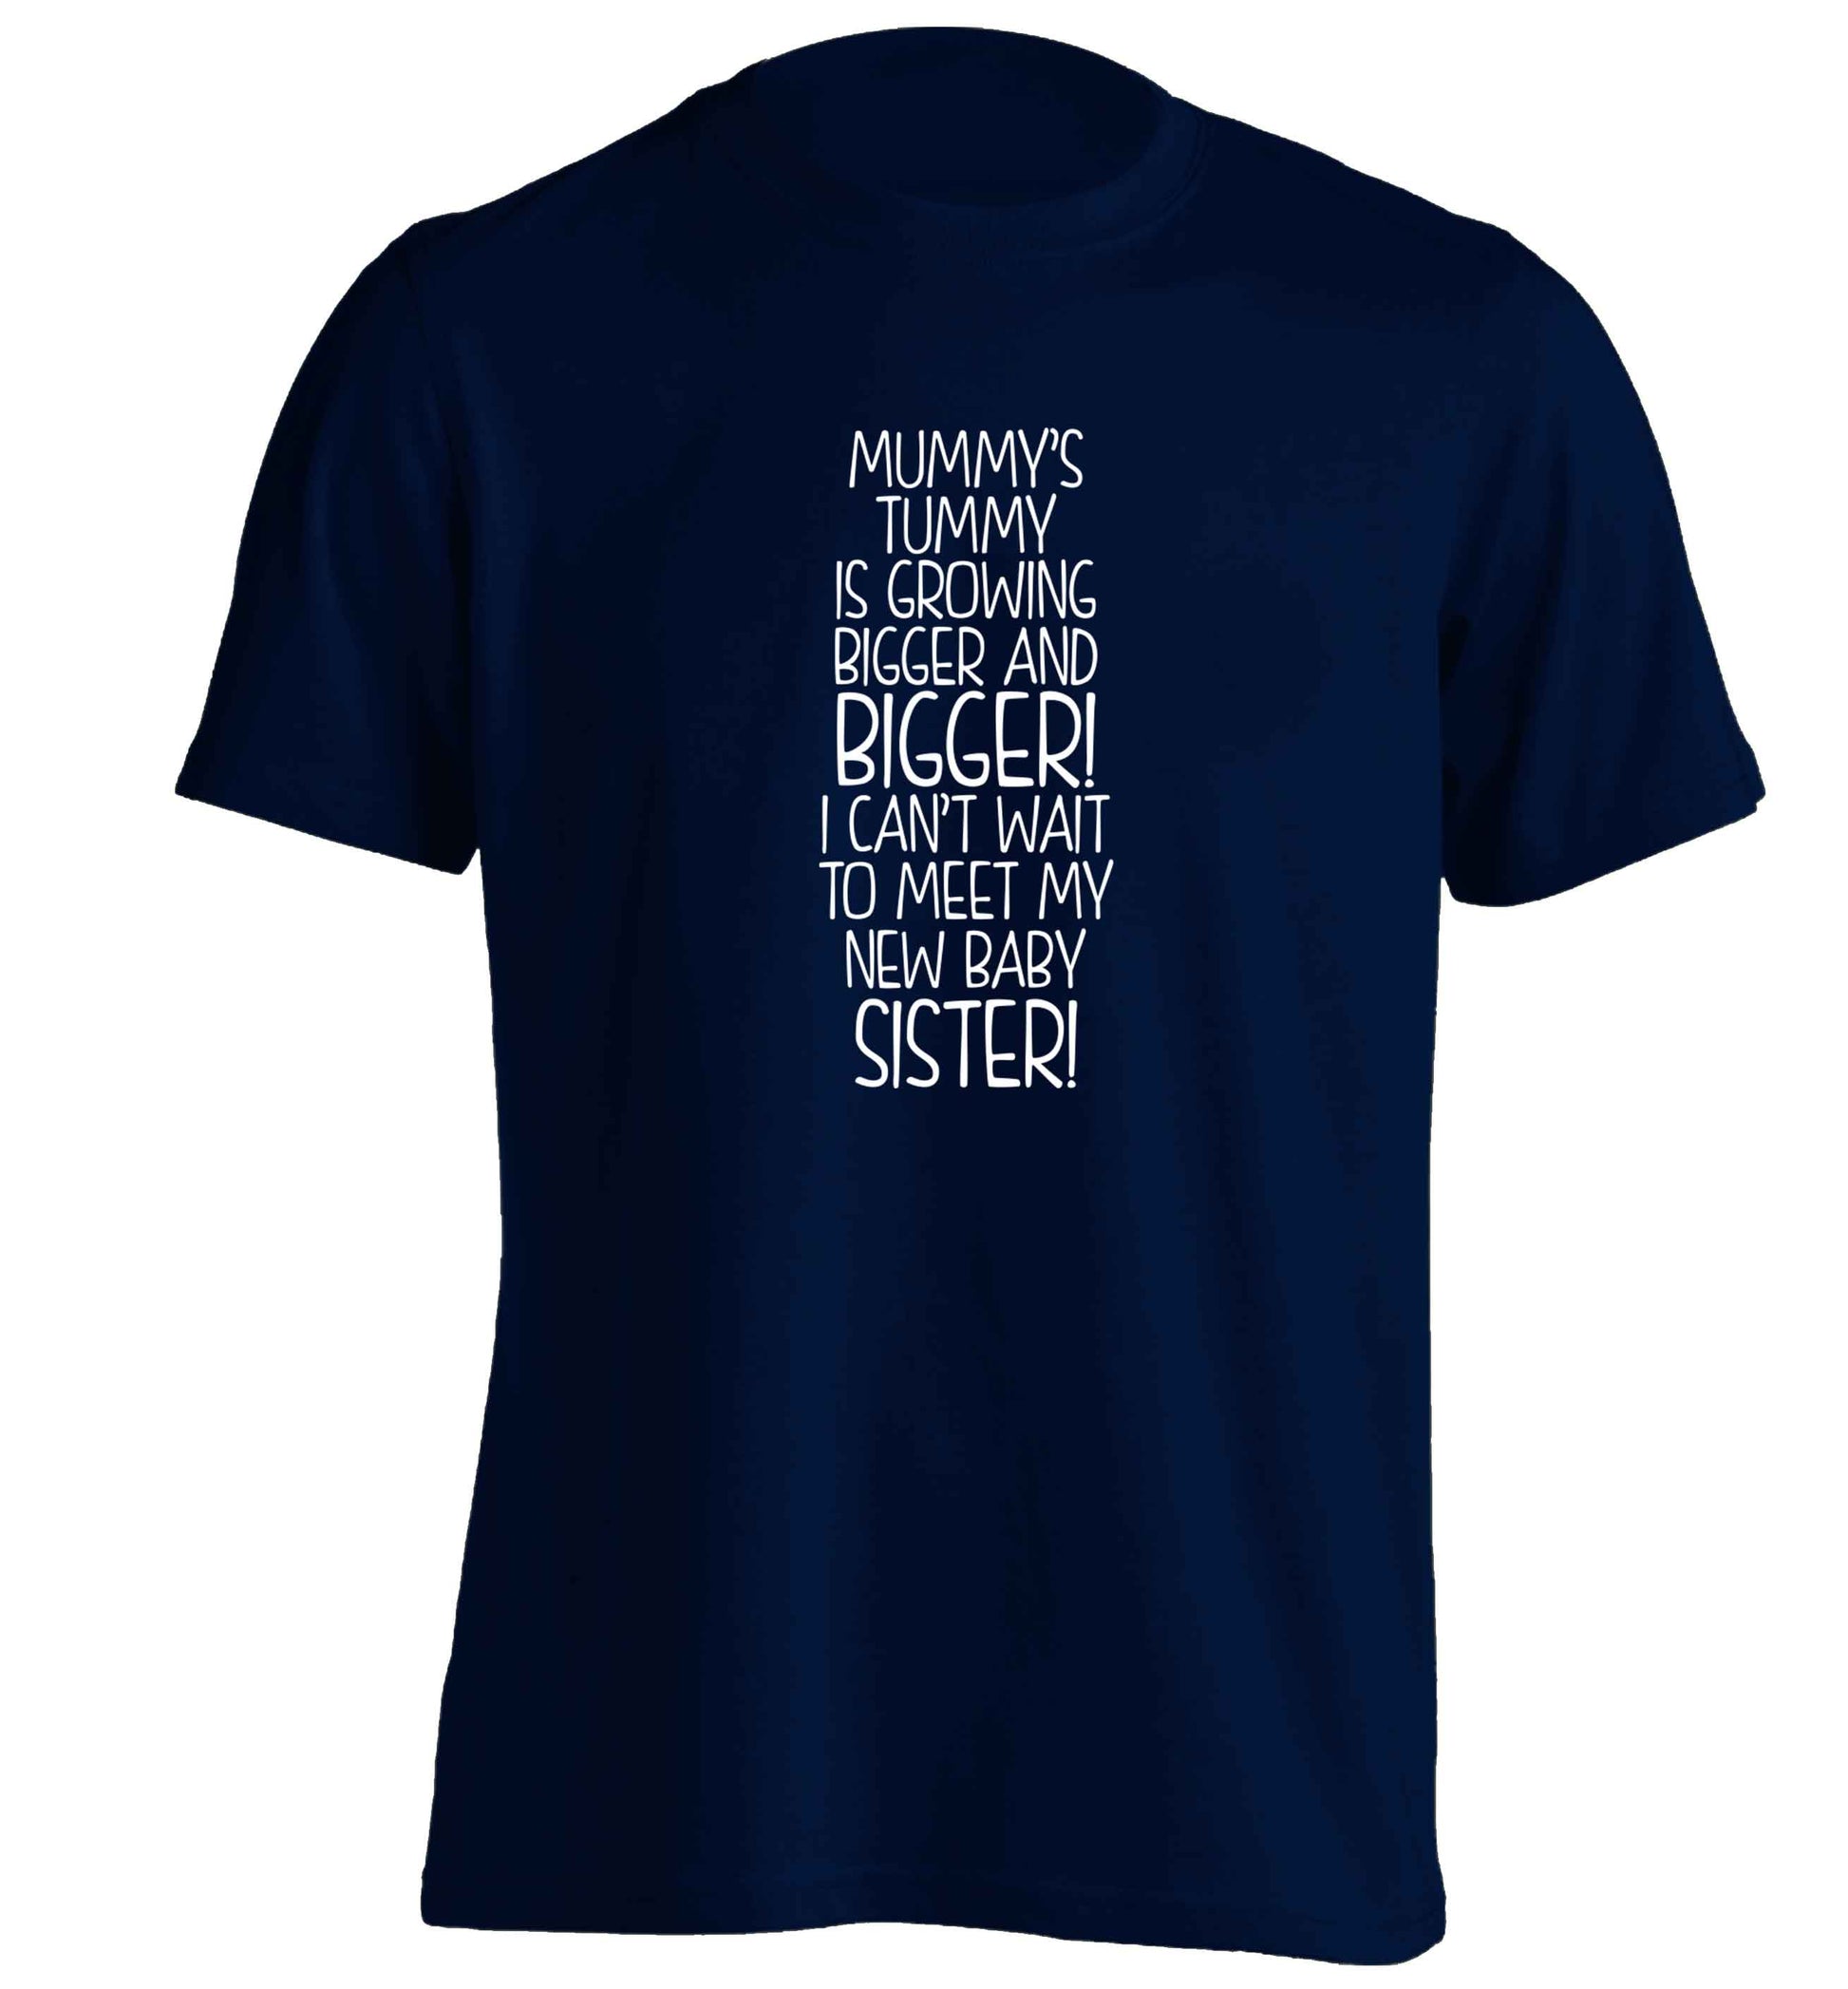 Mummy's tummy is growing bigger and bigger I can't wait to meet my new baby sister! adults unisex navy Tshirt 2XL